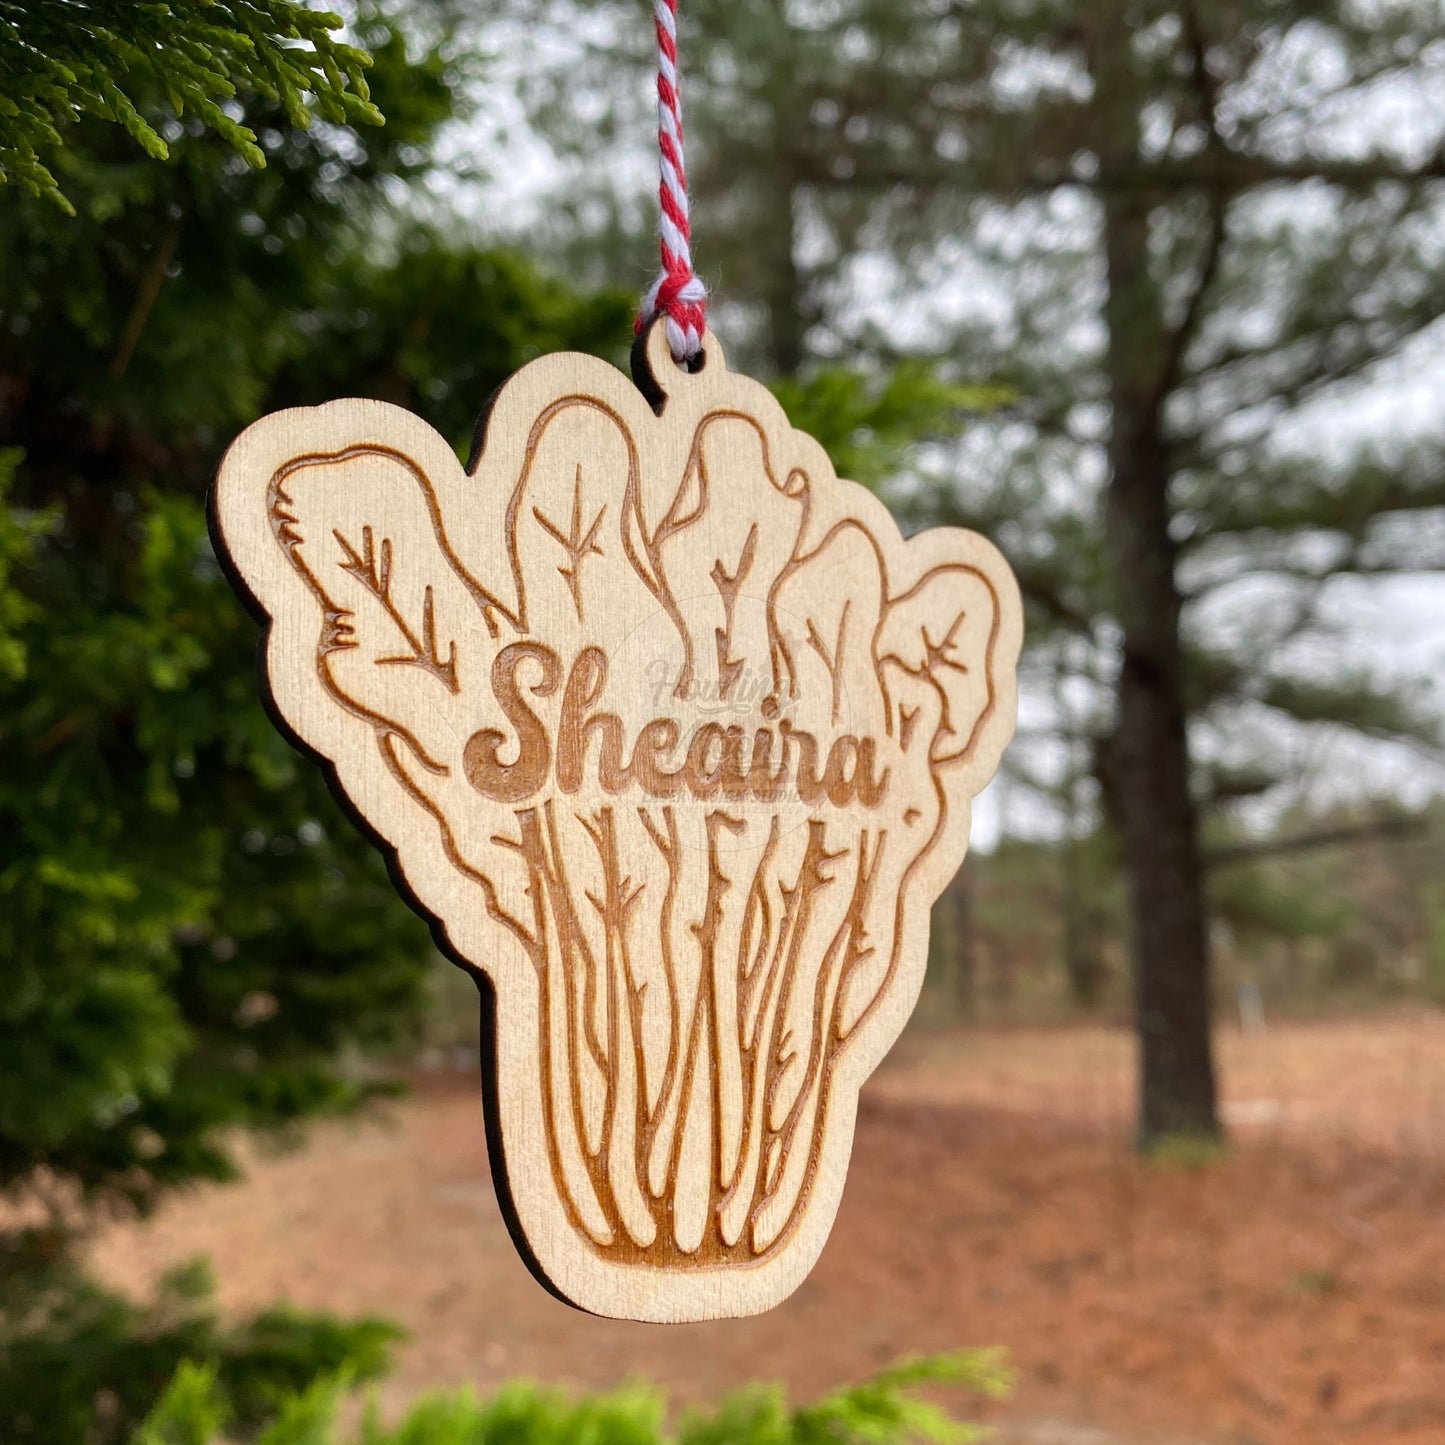 Close up of Personalized romaine lettuce ornament from Howling Moon Laser Design in Virginia, USA